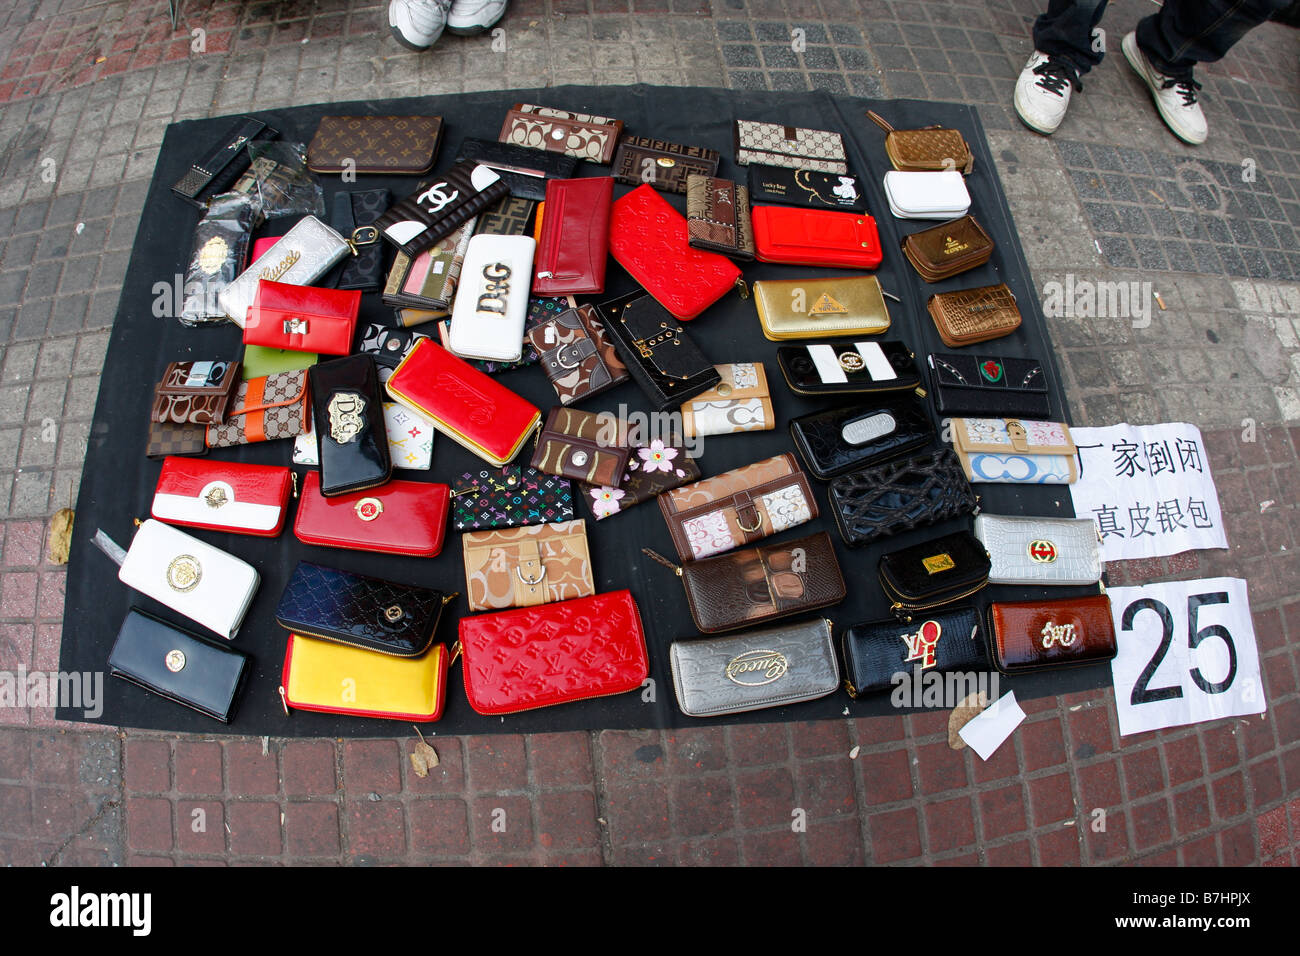 Fake luxury purses are sold on a sidewalk in downtown Guiyang, the capital  of China's Guizhou